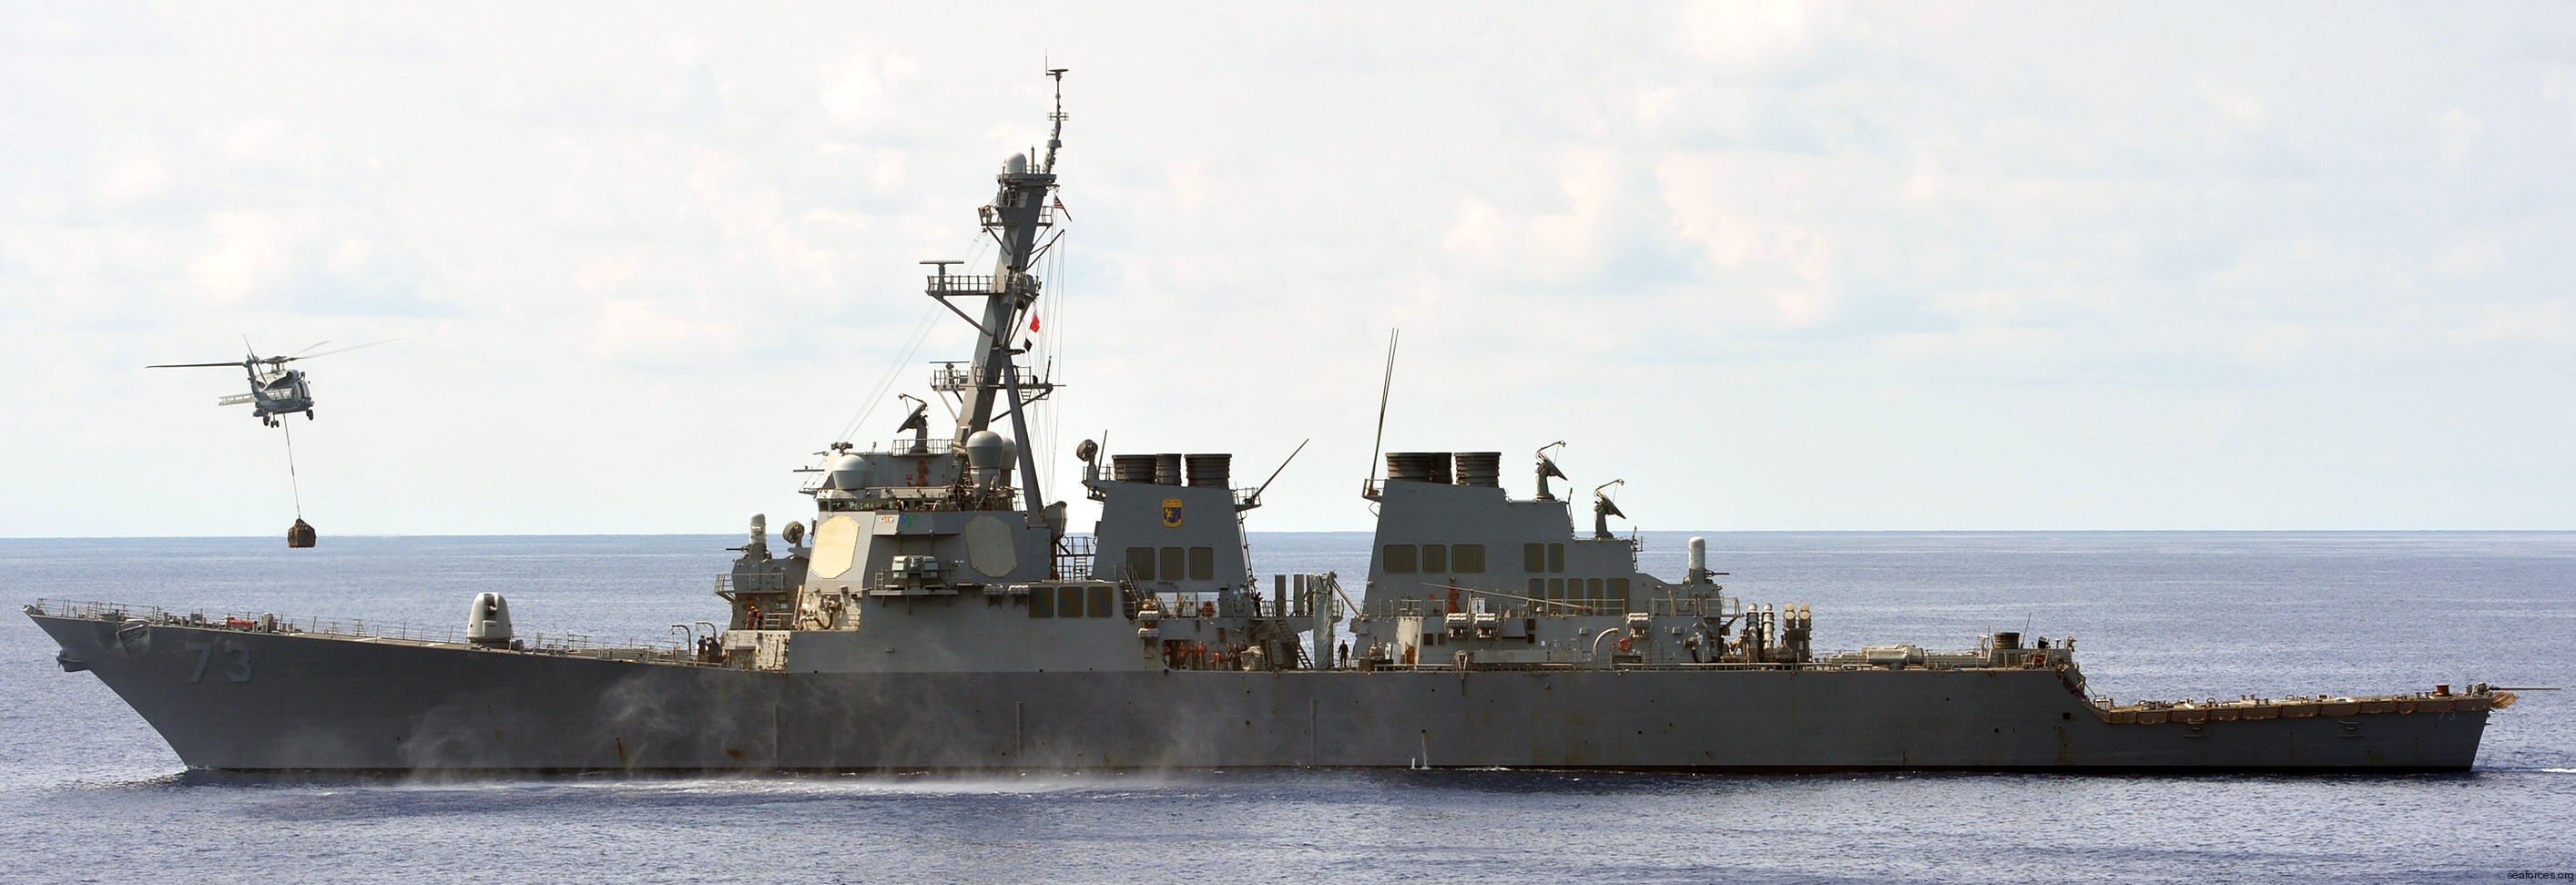 ddg-73 uss decatur guided missile destroyer arleigh burke class aegis bmd 09